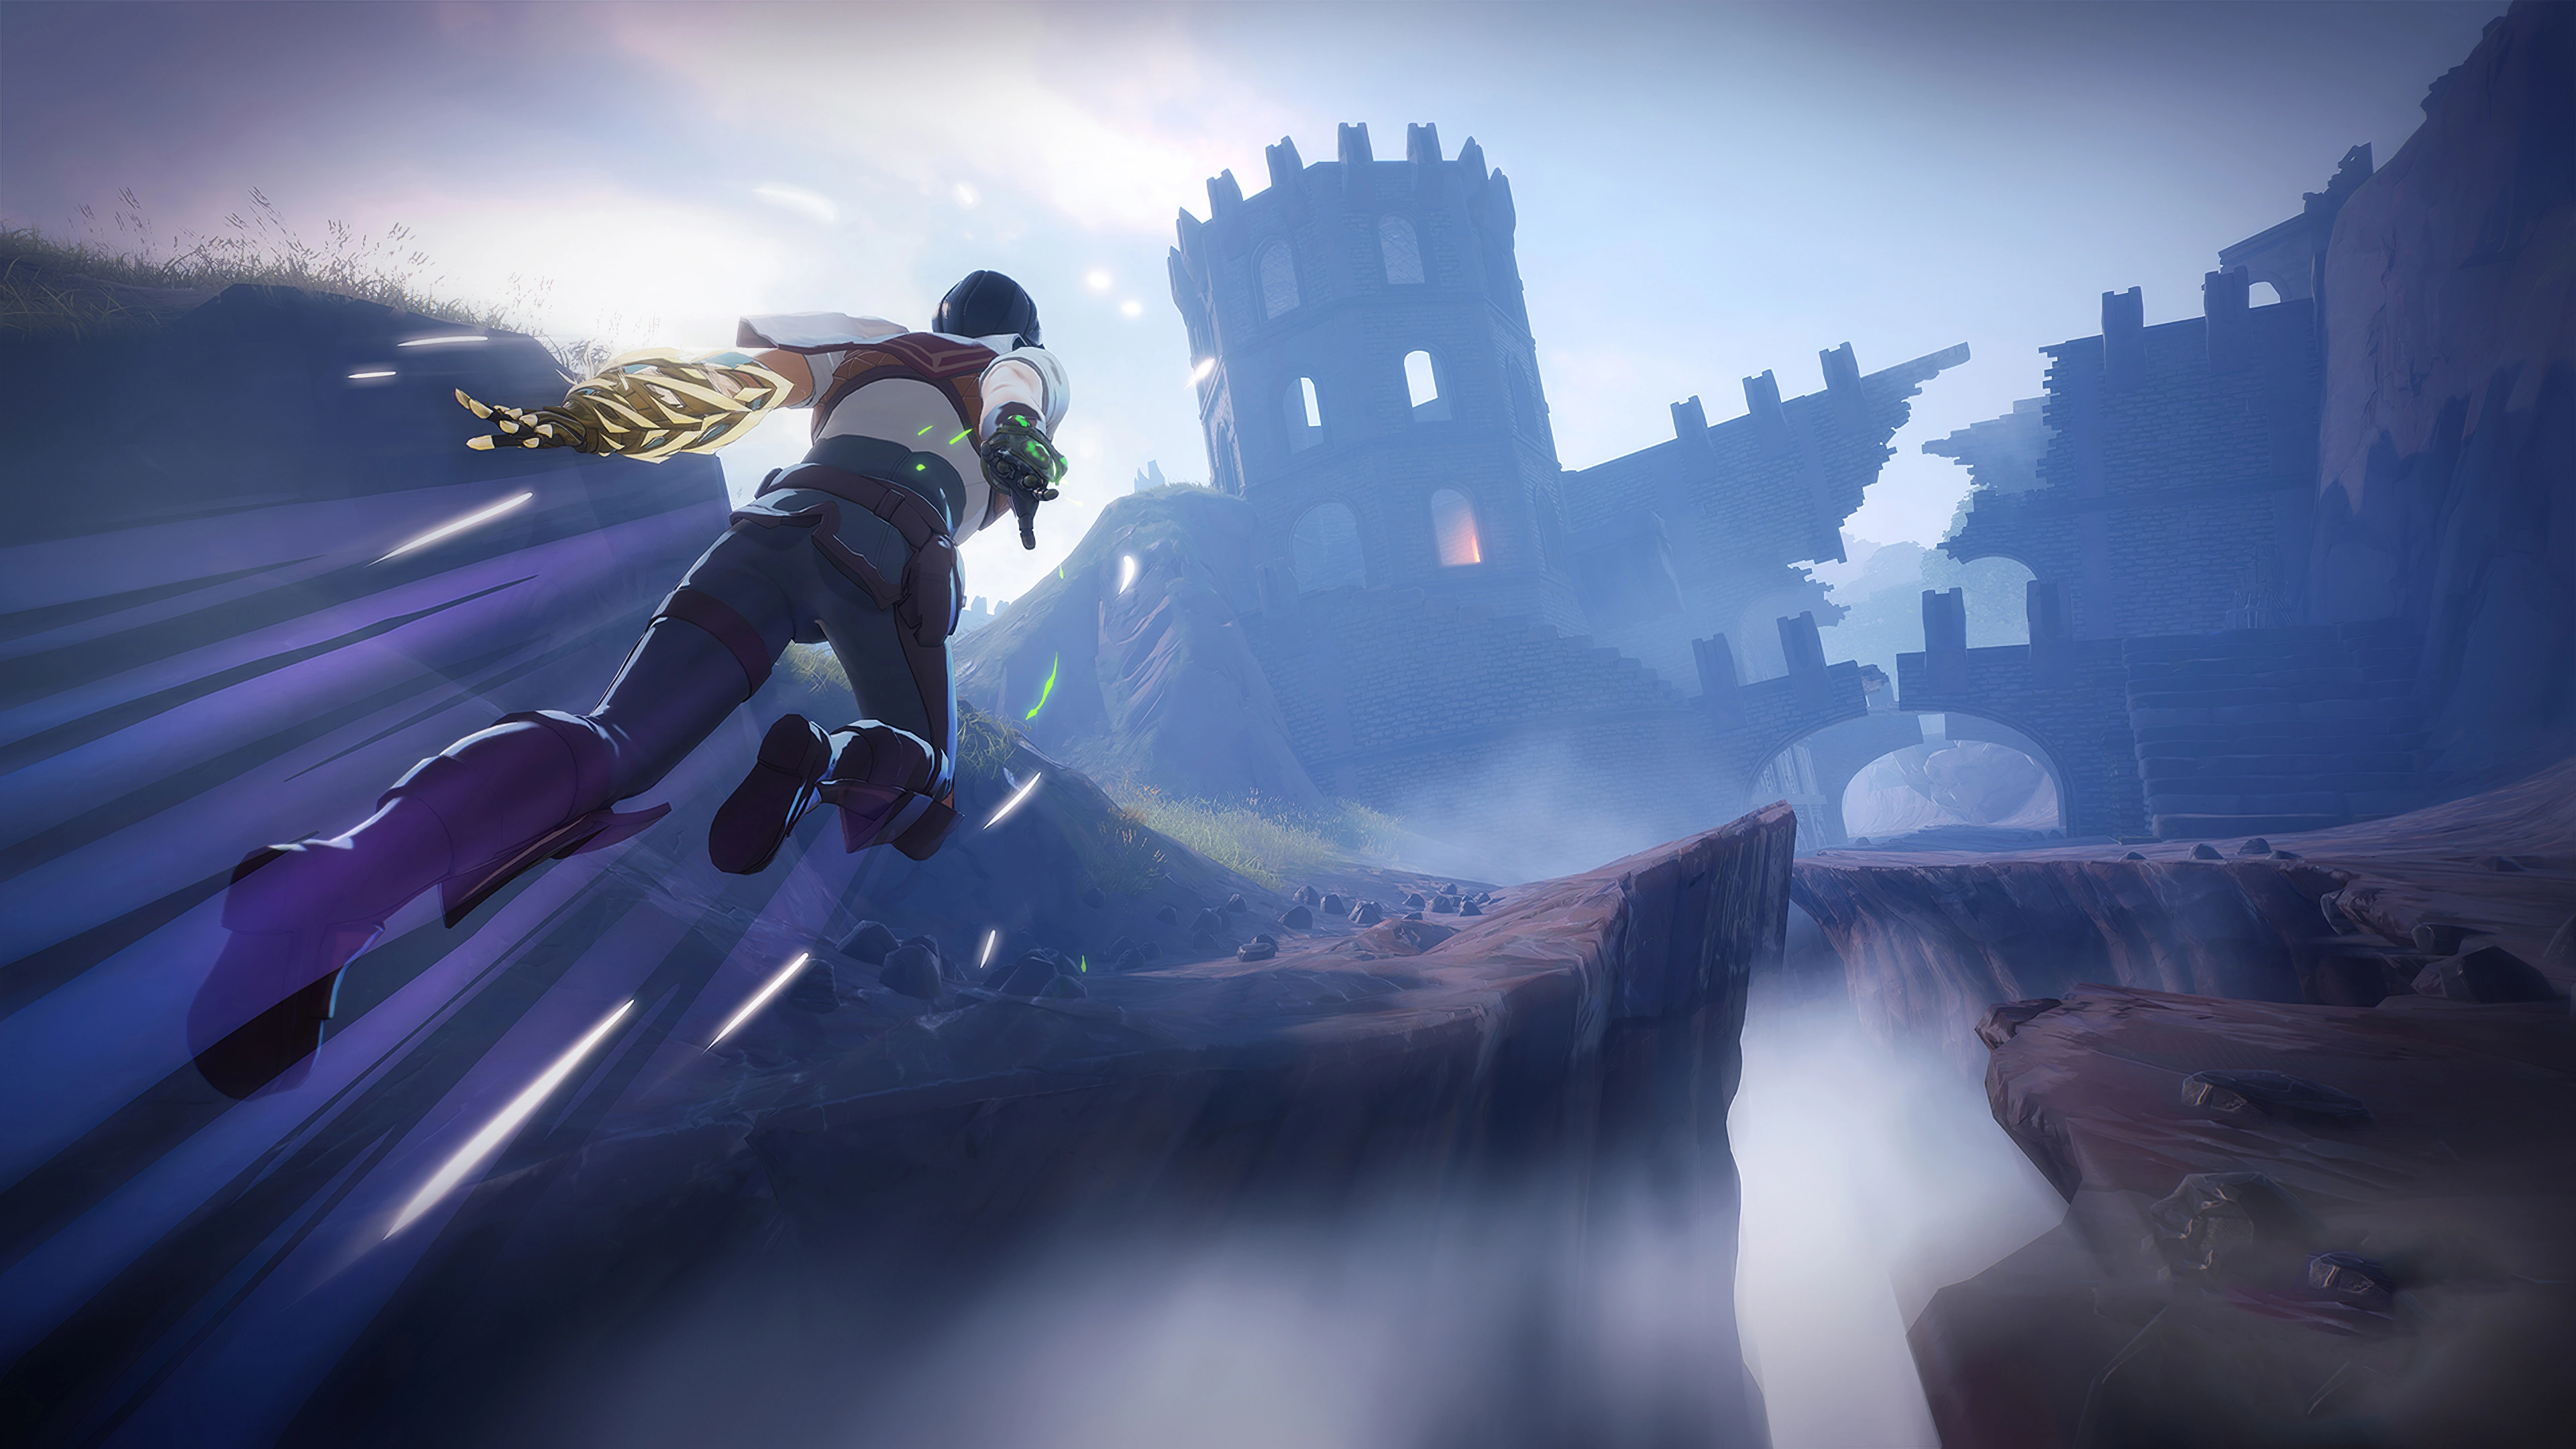 Anime wizard battle royale Spellbreak will be free to play at launch |  PCGamesN